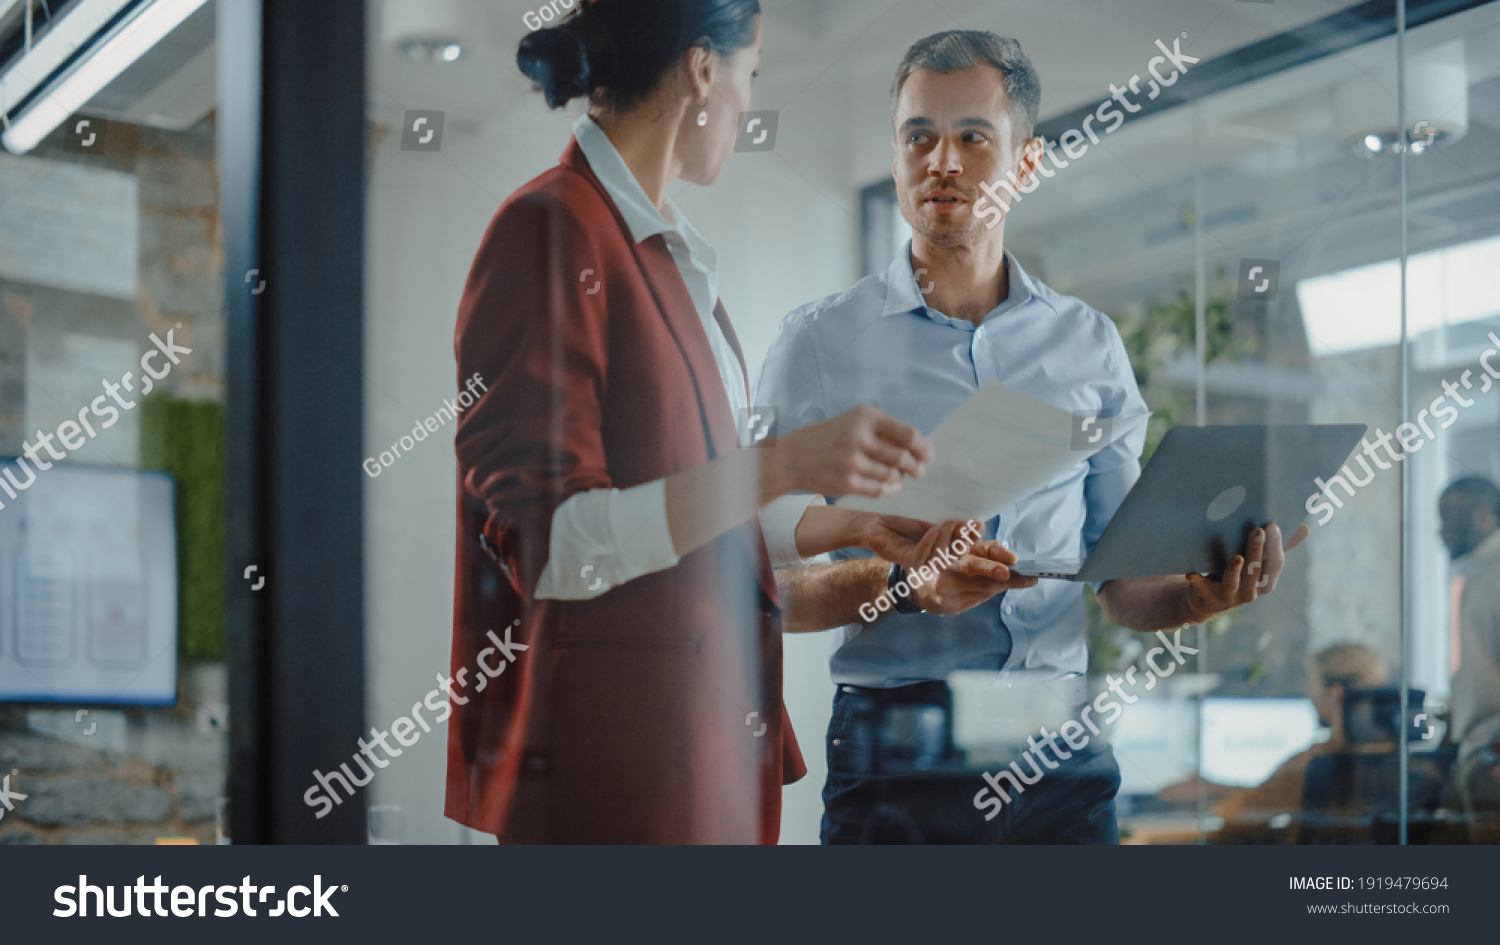 CEO and Chief Executive Talking About Company Business Growth, Consult Data Analysis and Use Laptop Computer. Two Professionals Discussing Revenue Increase, Market Disruption, Planning Strategy #1919479694